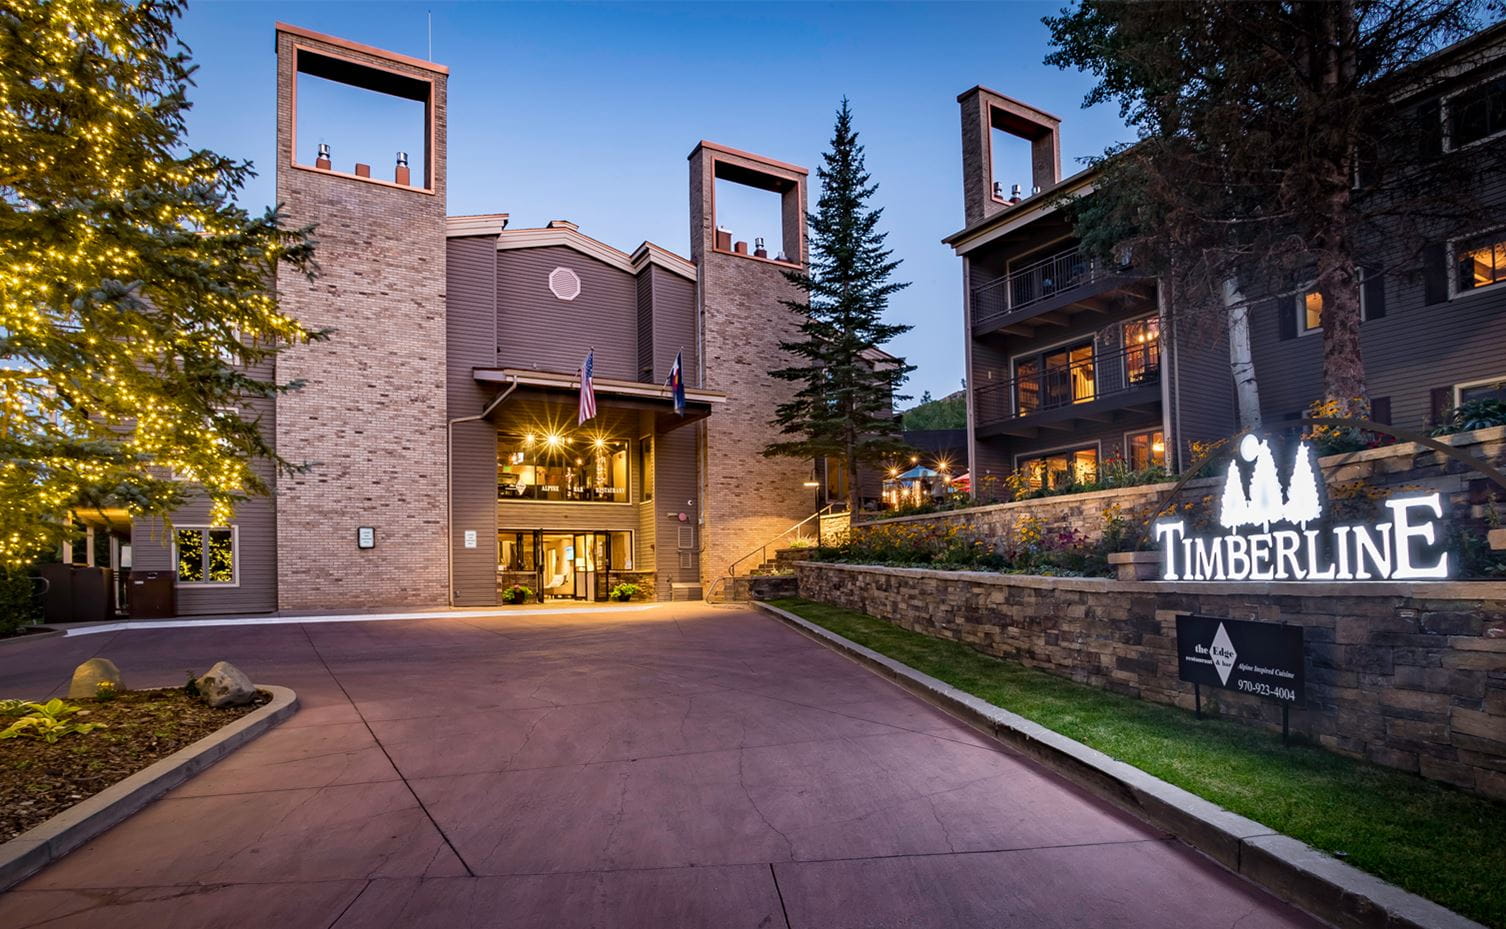 Timberline Condominiums in Snowmass Village, CO